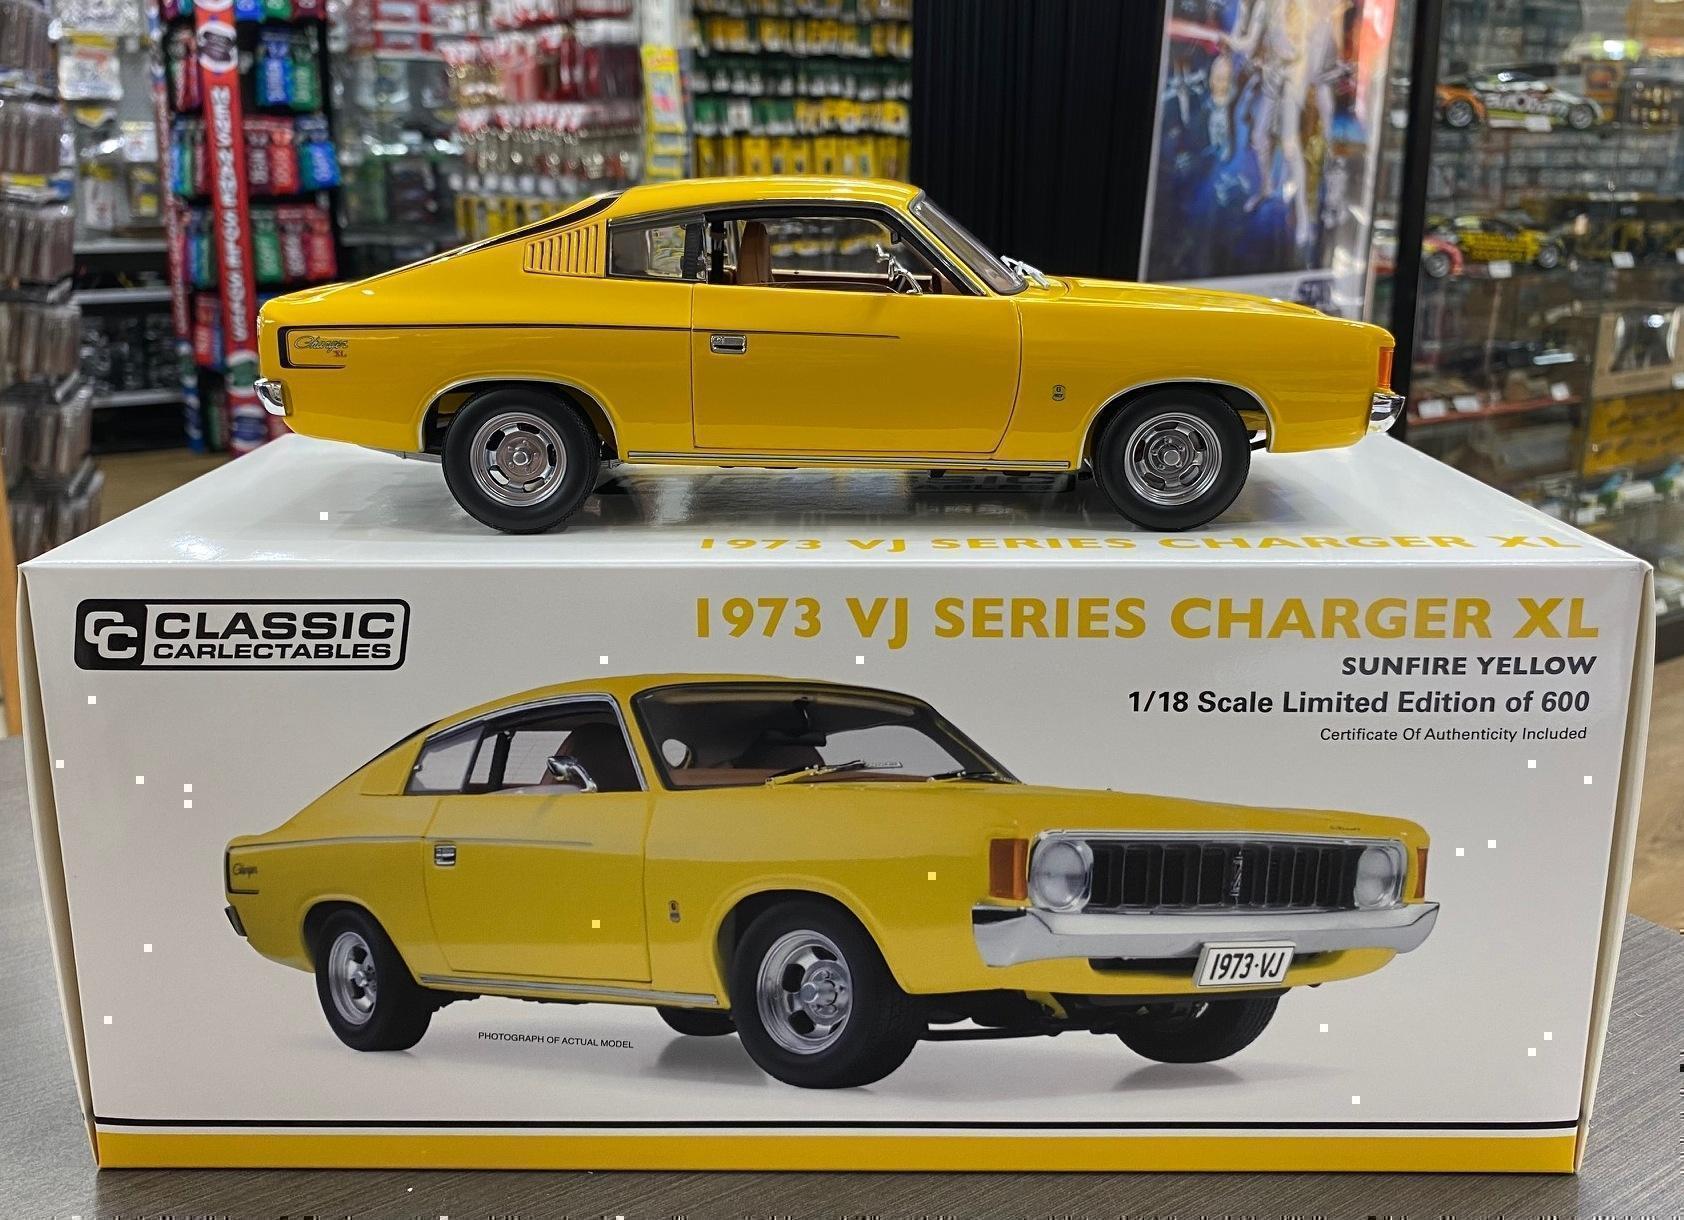 1973 Chrysler VJ Series Charger XL Sunfire Yellow 1:18 Scale Model Car